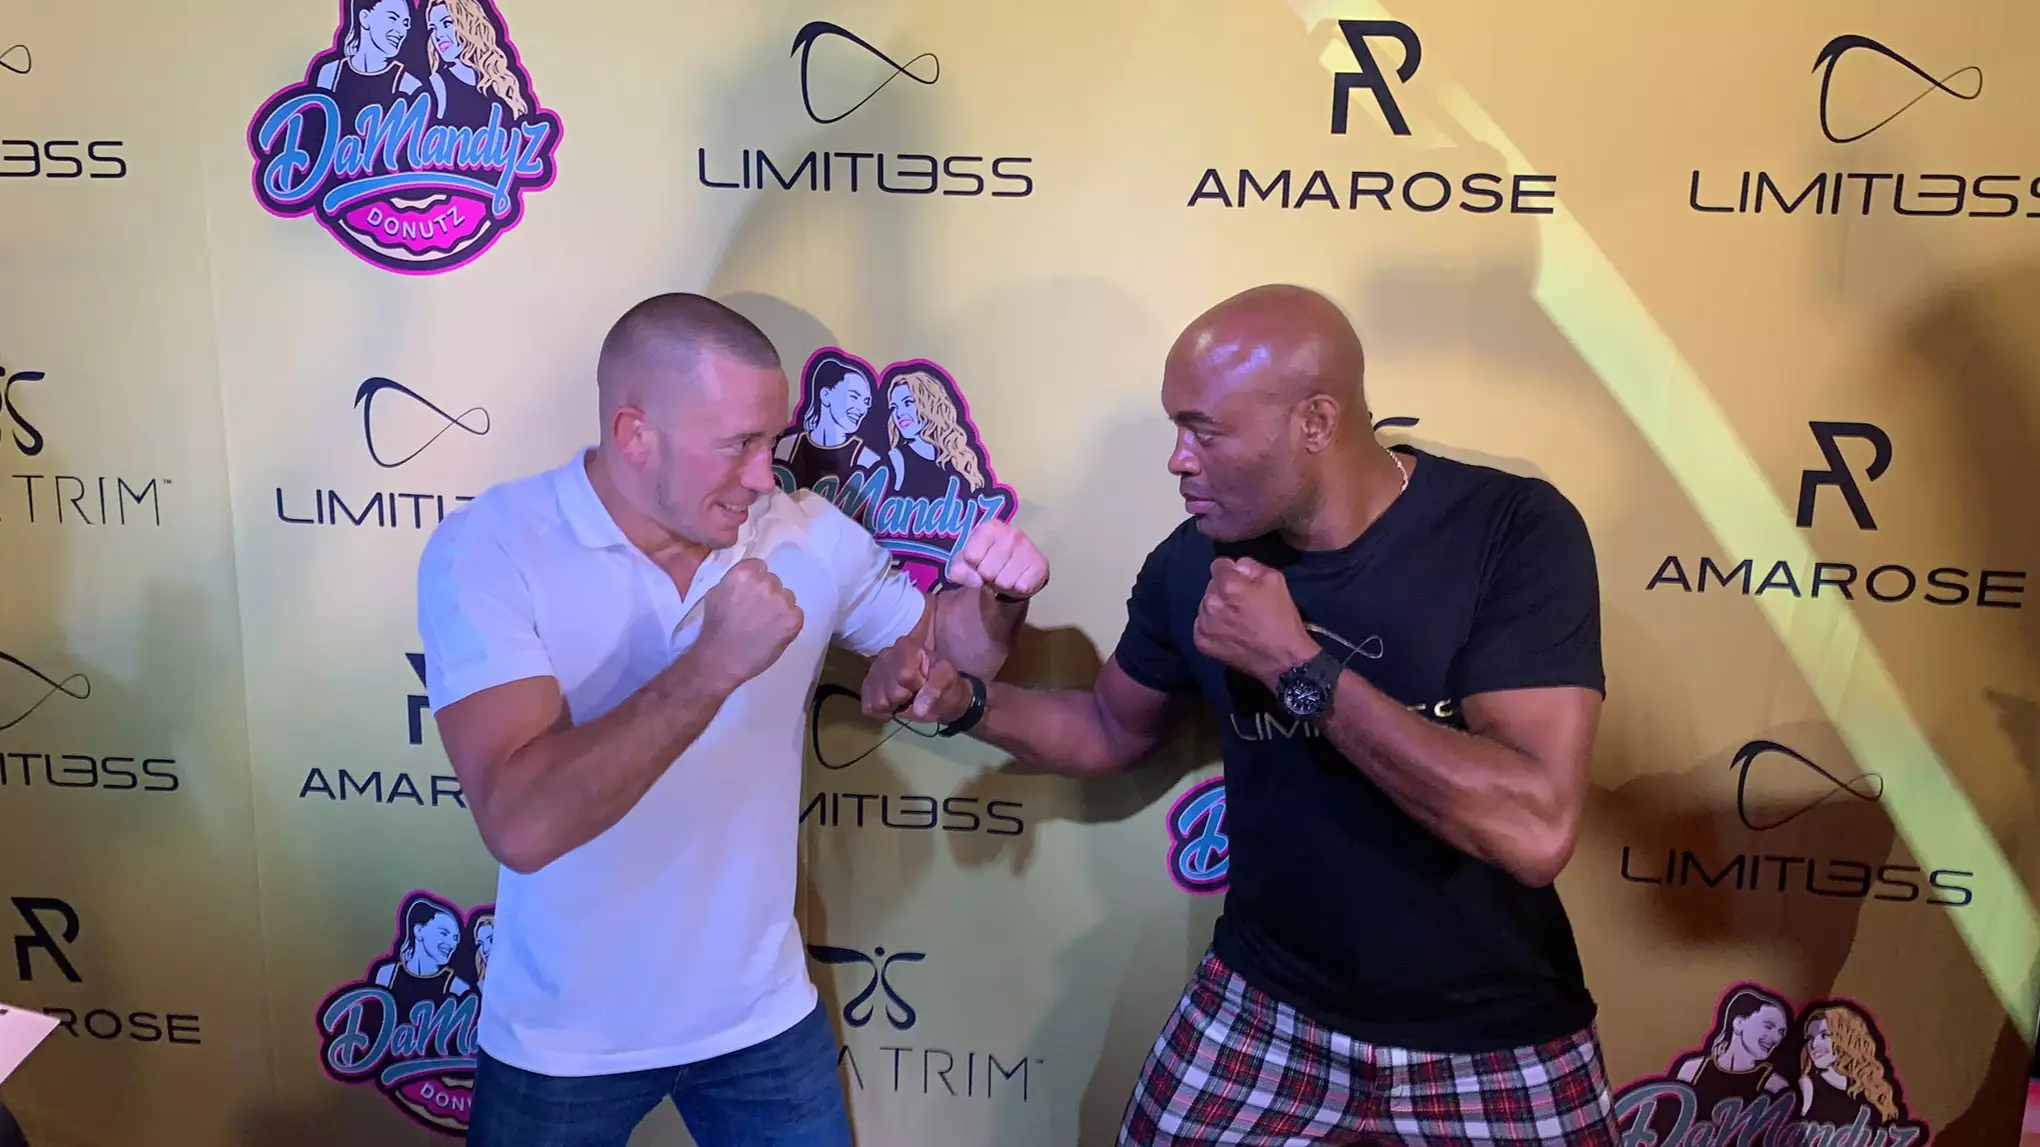 Anderson Silva And Georges St-Pierre Squared Off In Las Vegas This Weekend